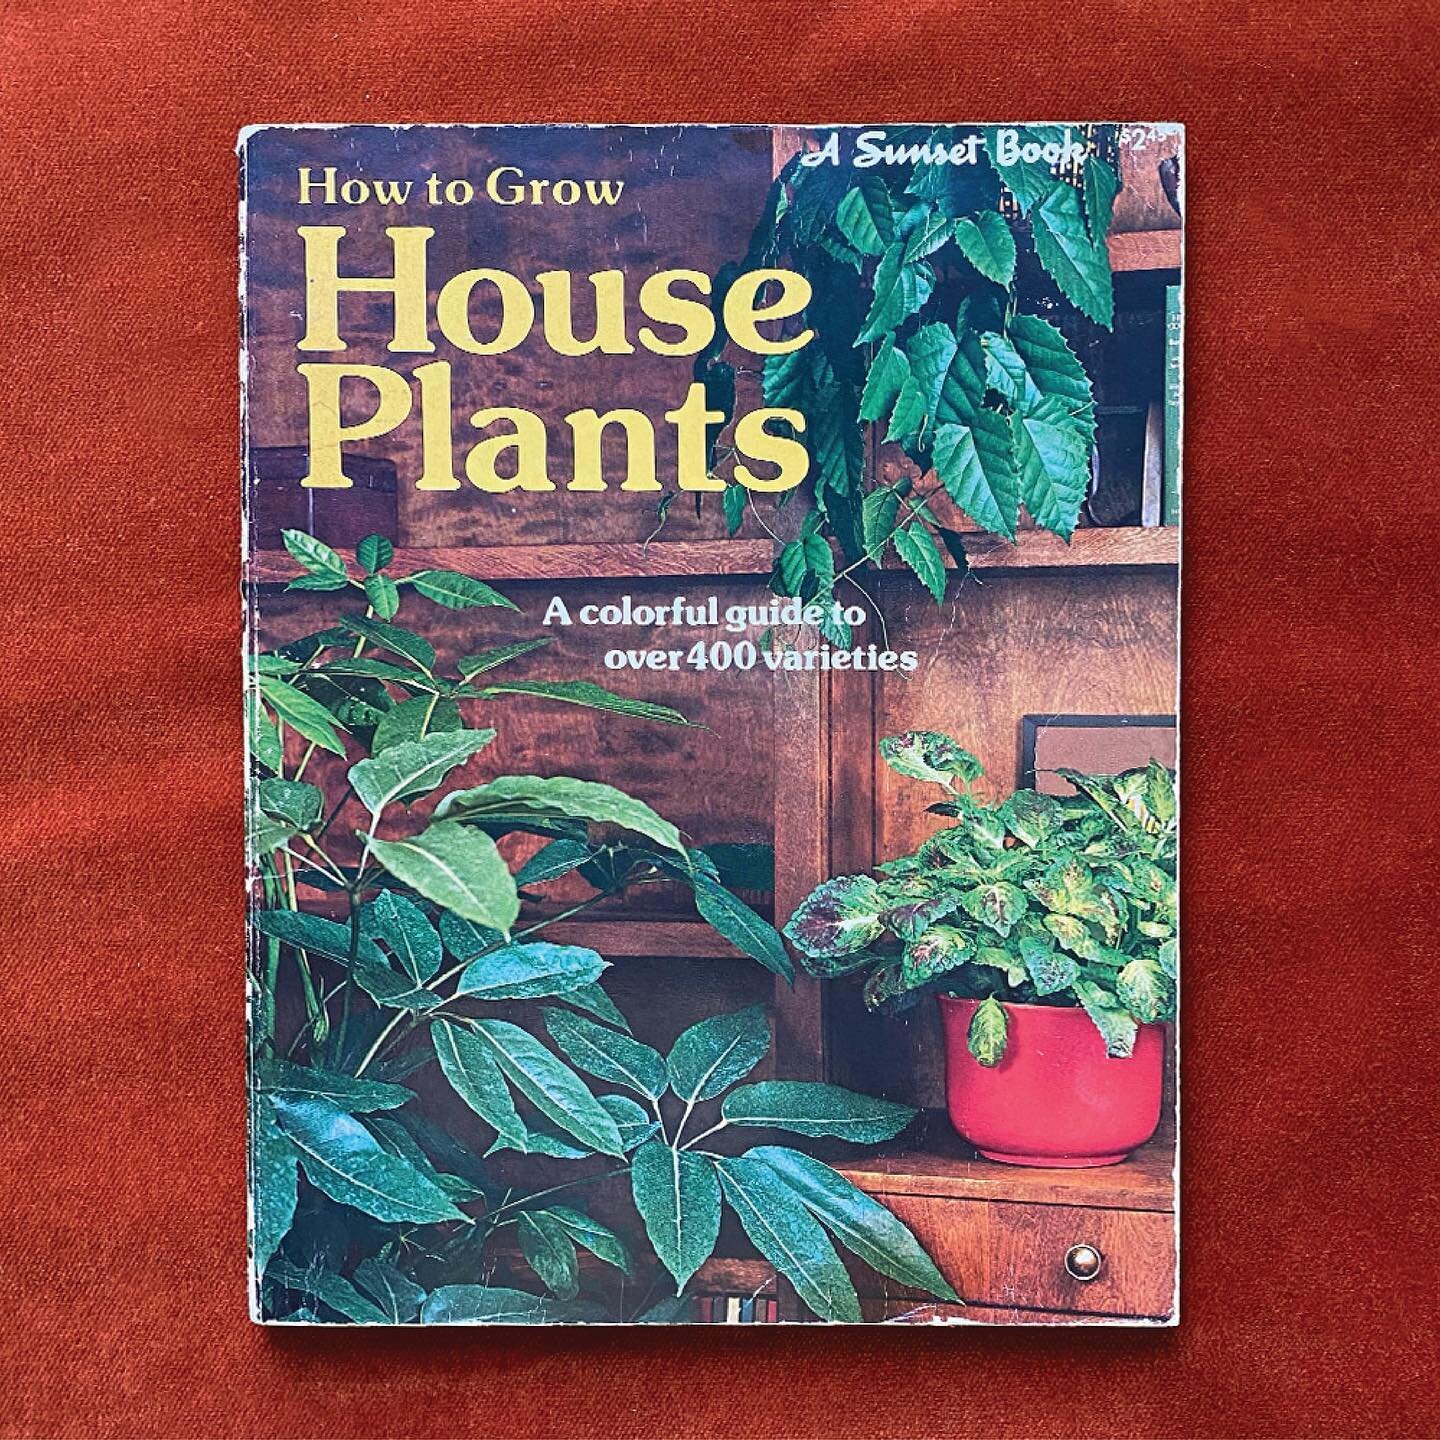 Choose your partner like you choose your house plants 

How To Grow House Plants, 1977
Sunset Booke, Artwork by Dinah James

#kangaroovine #coleusblumei #paintednettle #brassiamaculata #orchid #tolmieamenziesii #piggybackplant #fern #platyceriumbifur